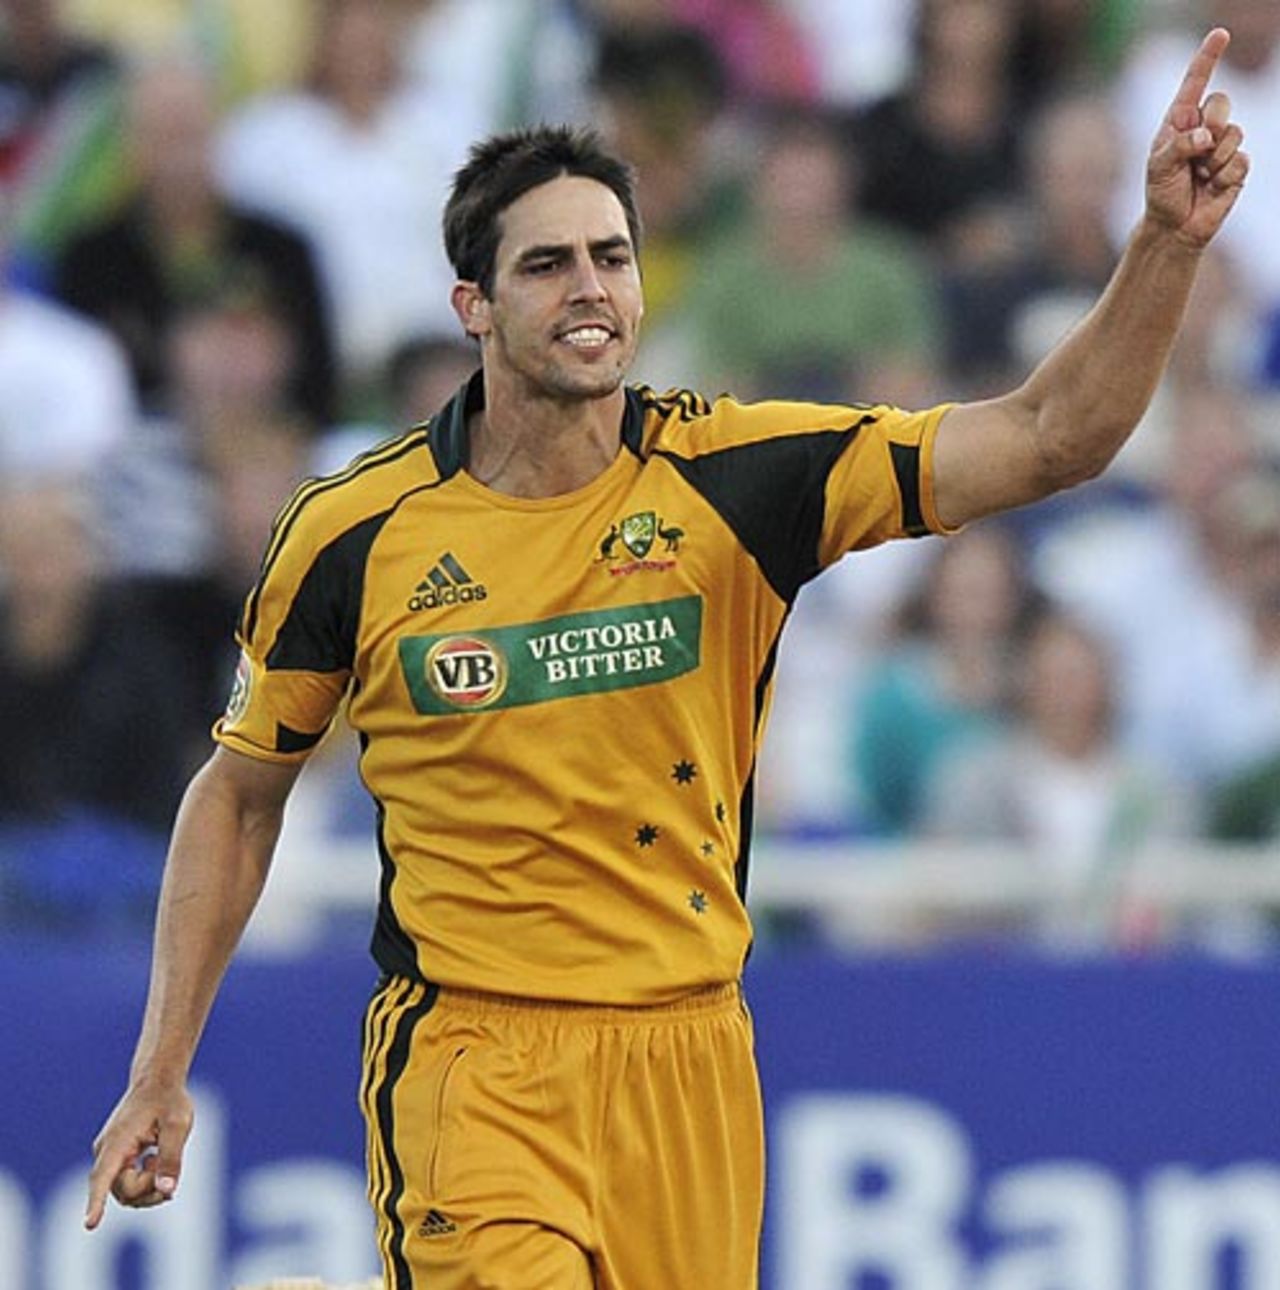 Mitchell Johnson took 4 for 34, South Africa v Australia, 3rd ODI, Newlands, Cape Town, April 9, 2009